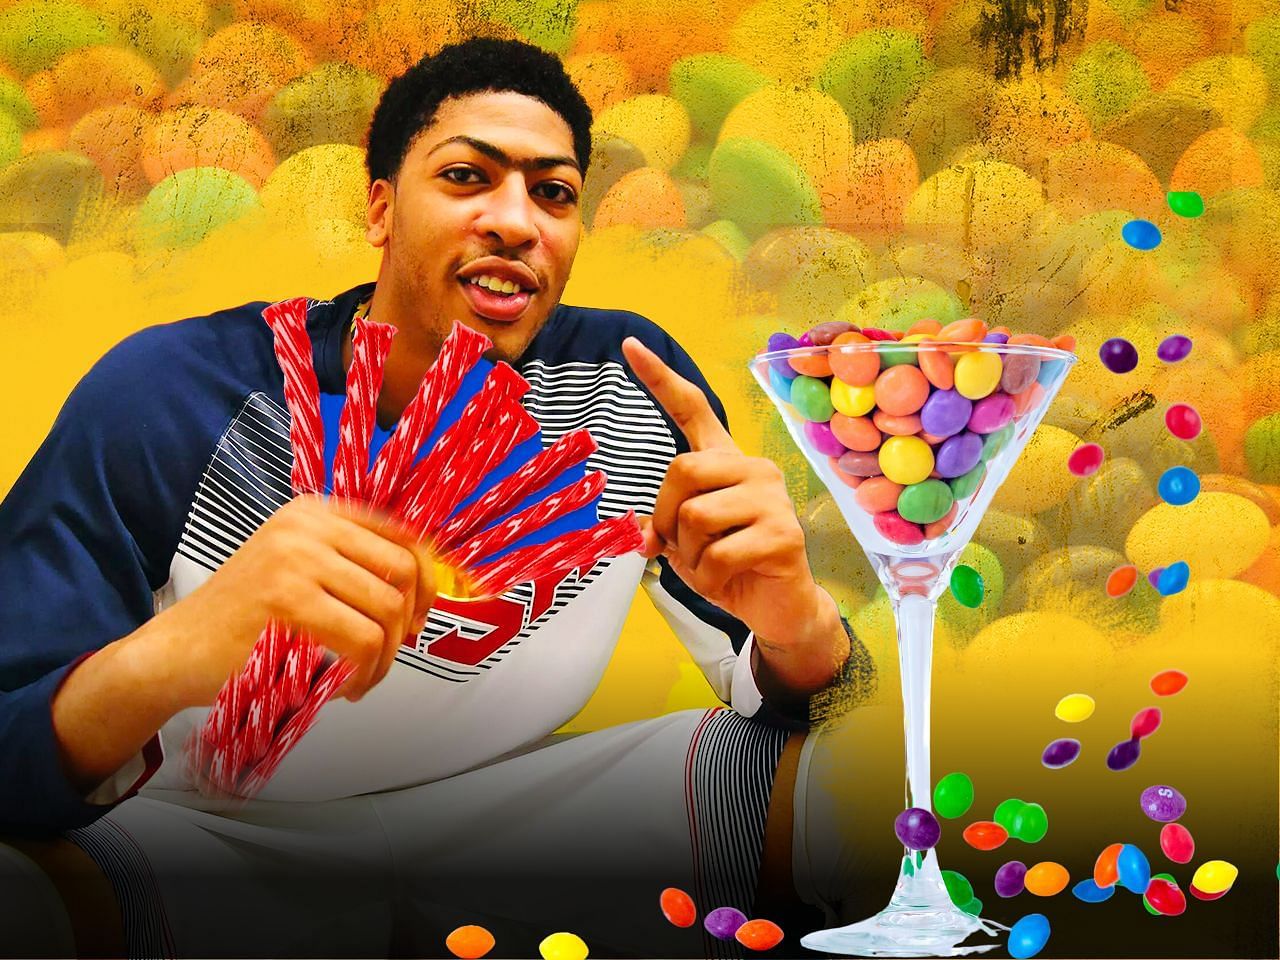 Anthony Davis eating Skittles and Twizzlers